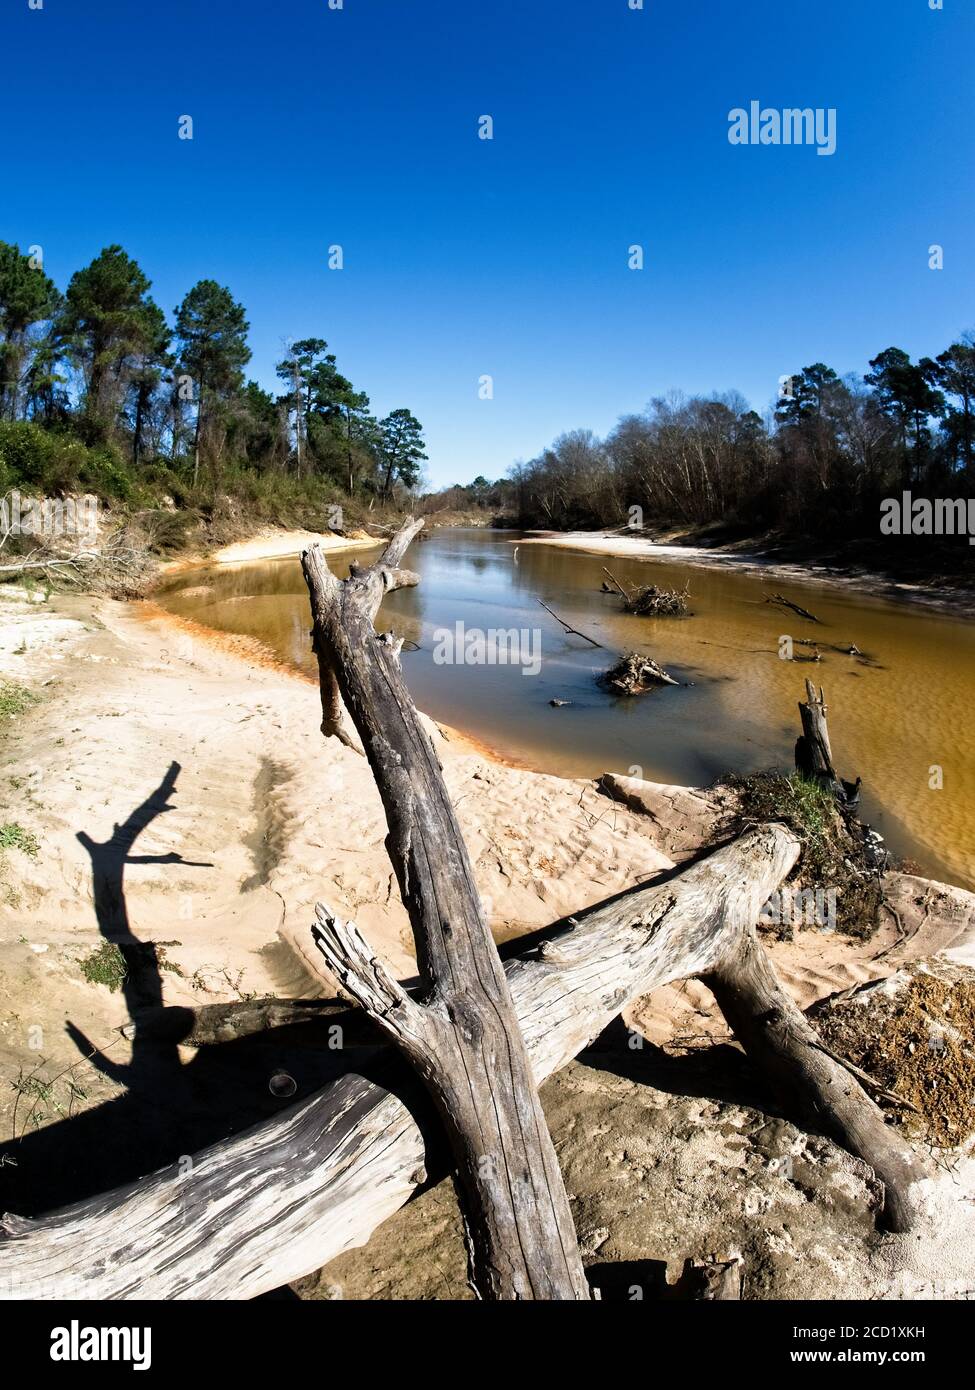 The Woodlands TX USA - 01-20-2020 - Tote Bäume in Ein Sandy River Bed entlang eines Baches 2 Stockfoto